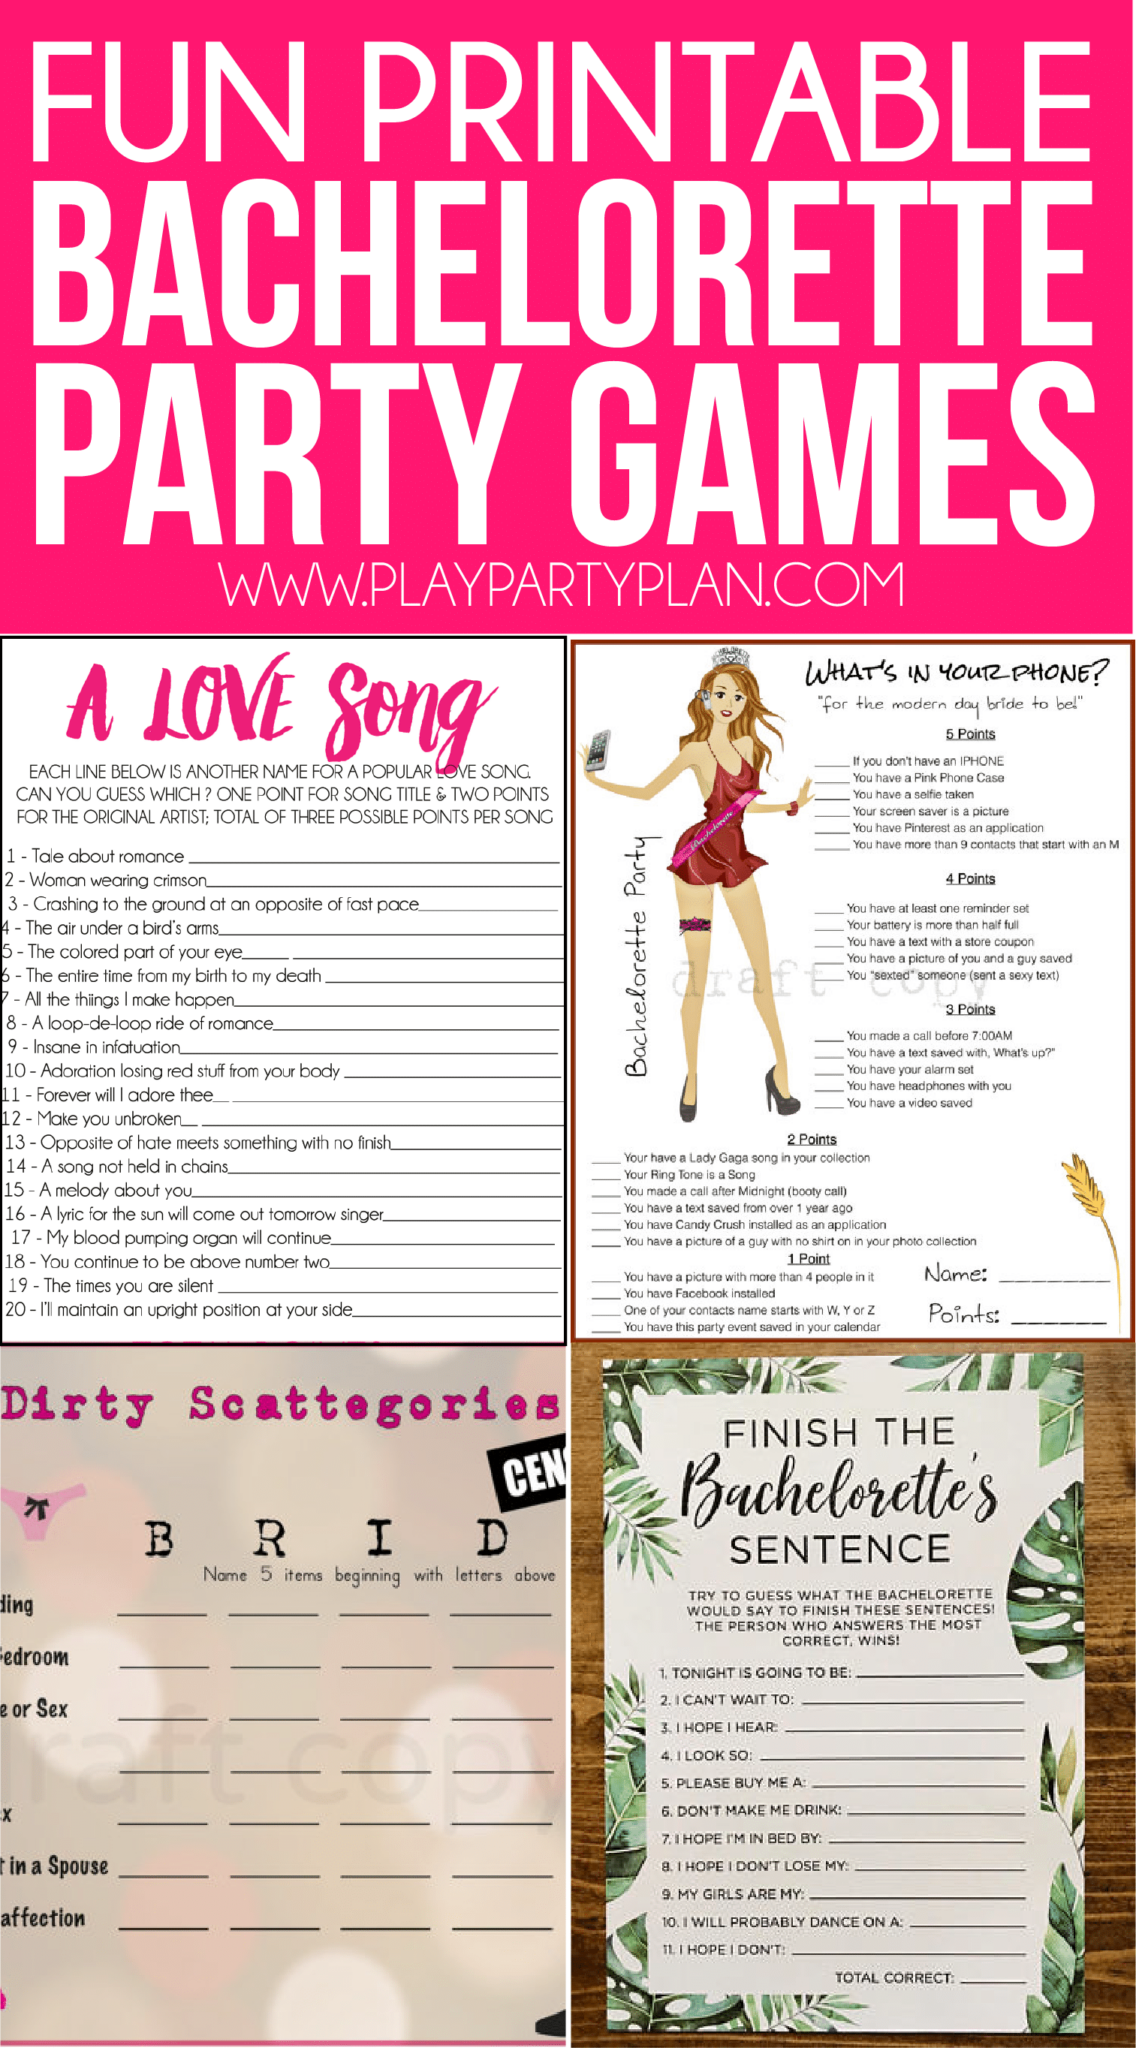 Printable Bachelorette Party Games Customize and Print